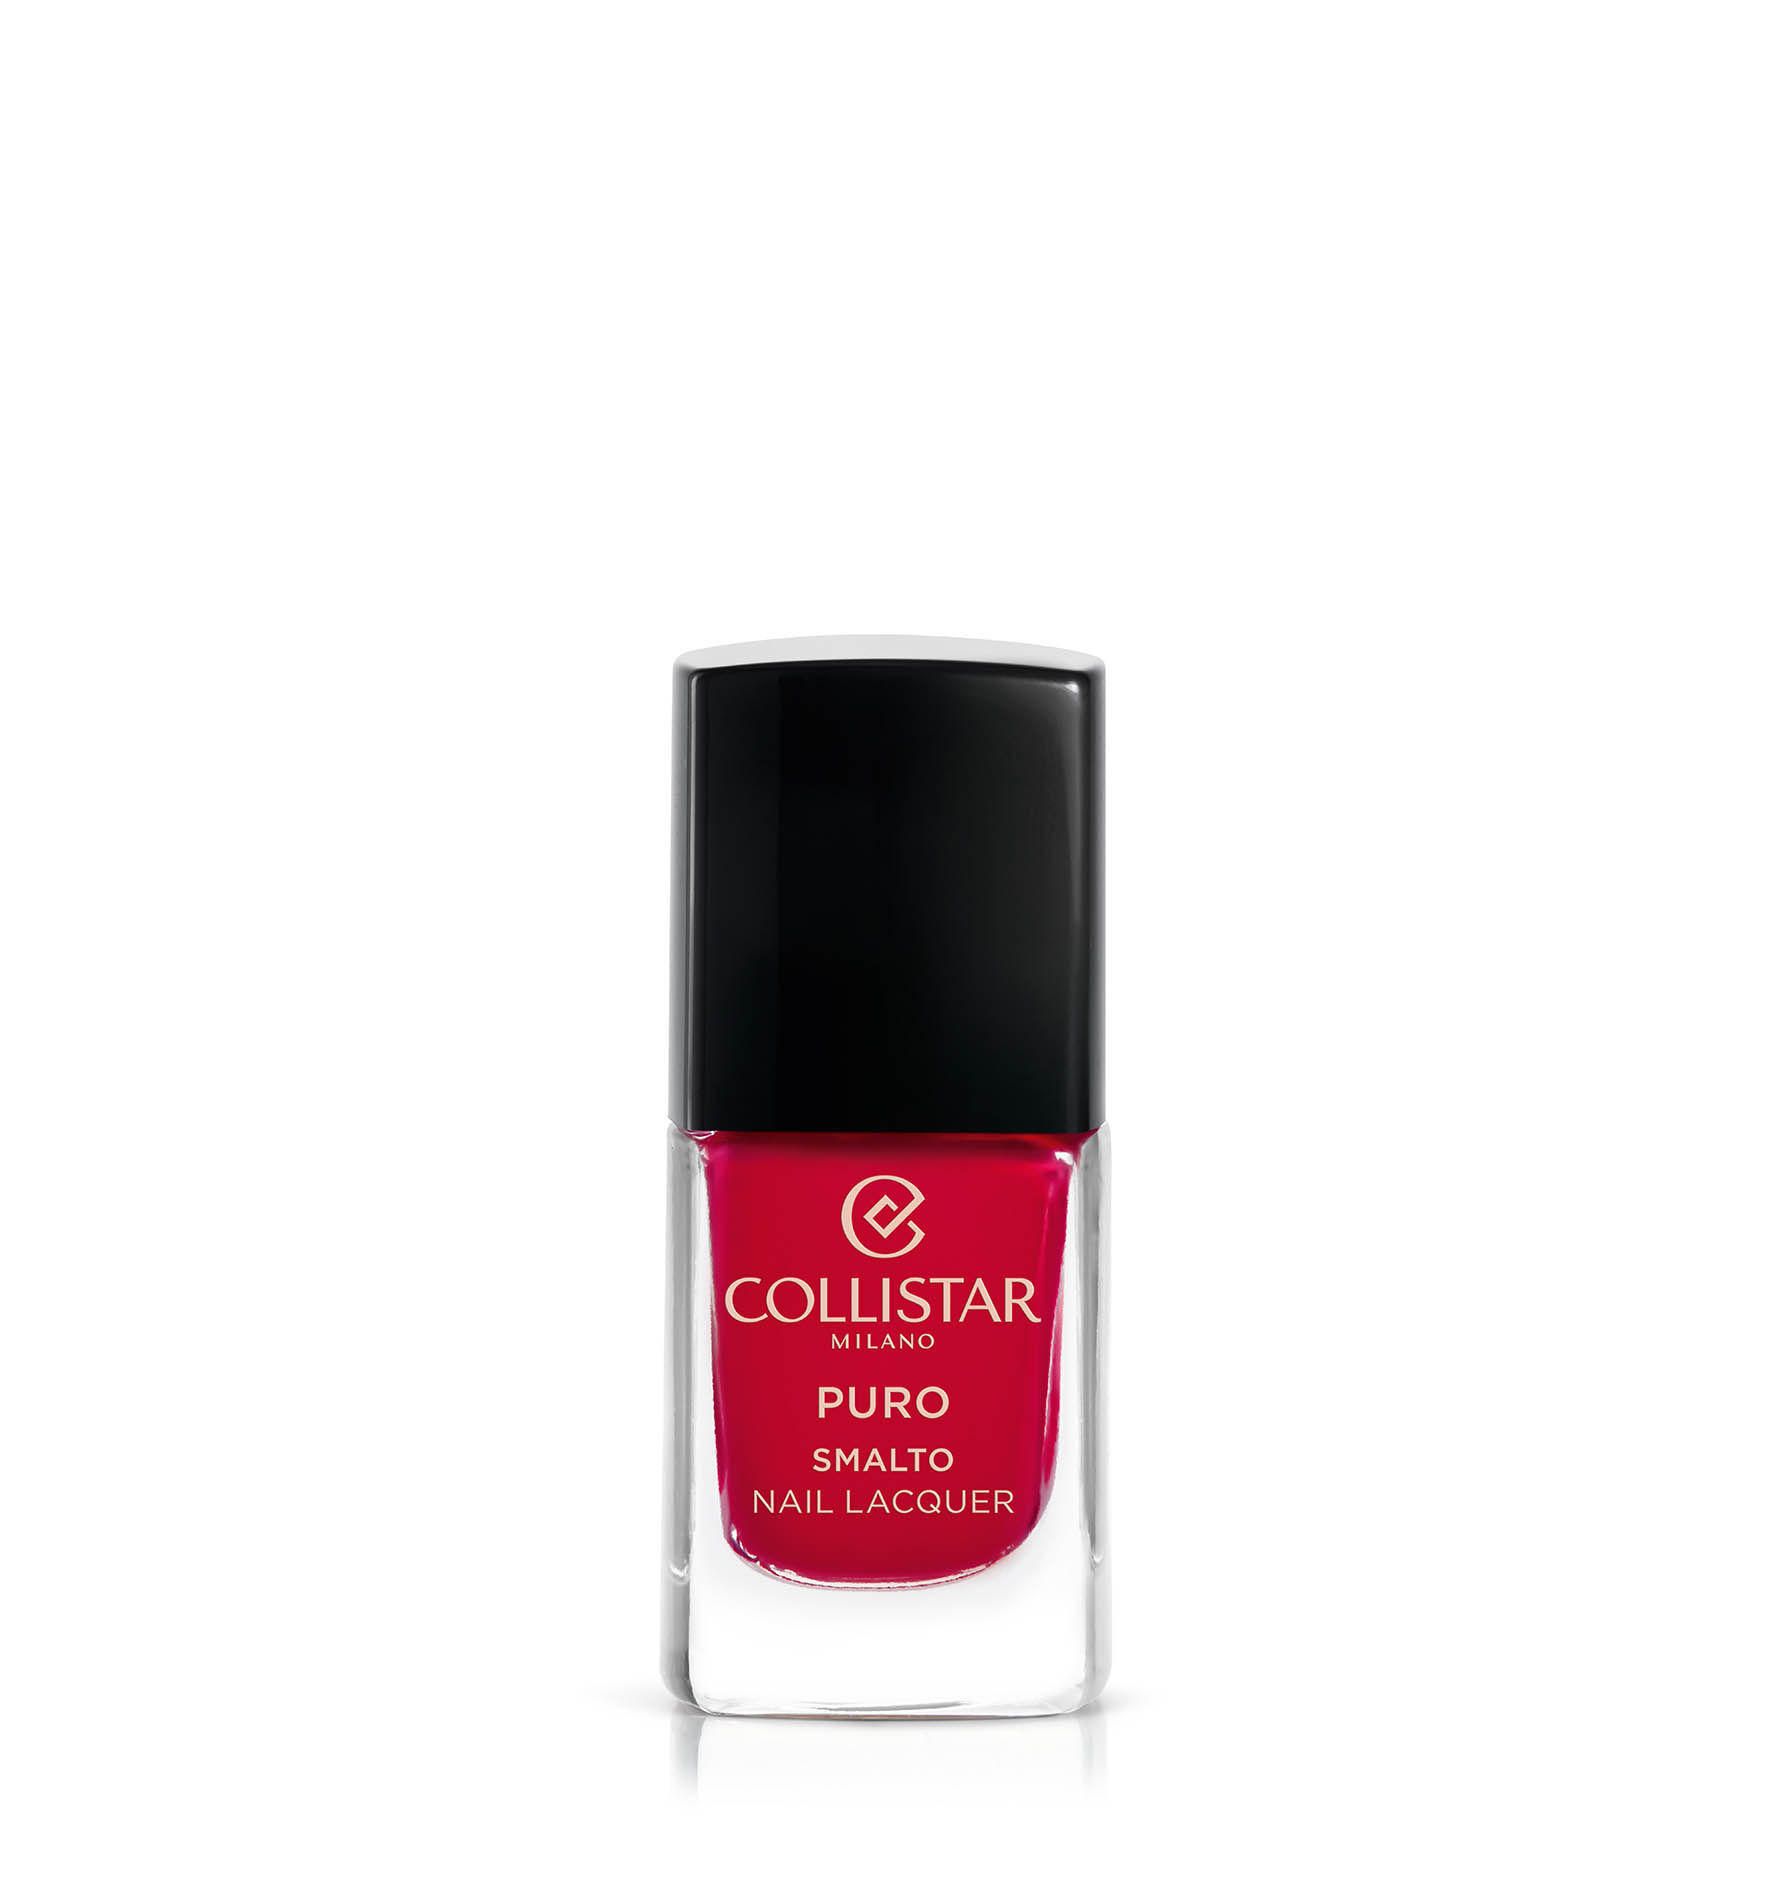 PURO LONG-LASTING NAIL LACQUER - Make Up | Collistar - Shop Online Ufficiale